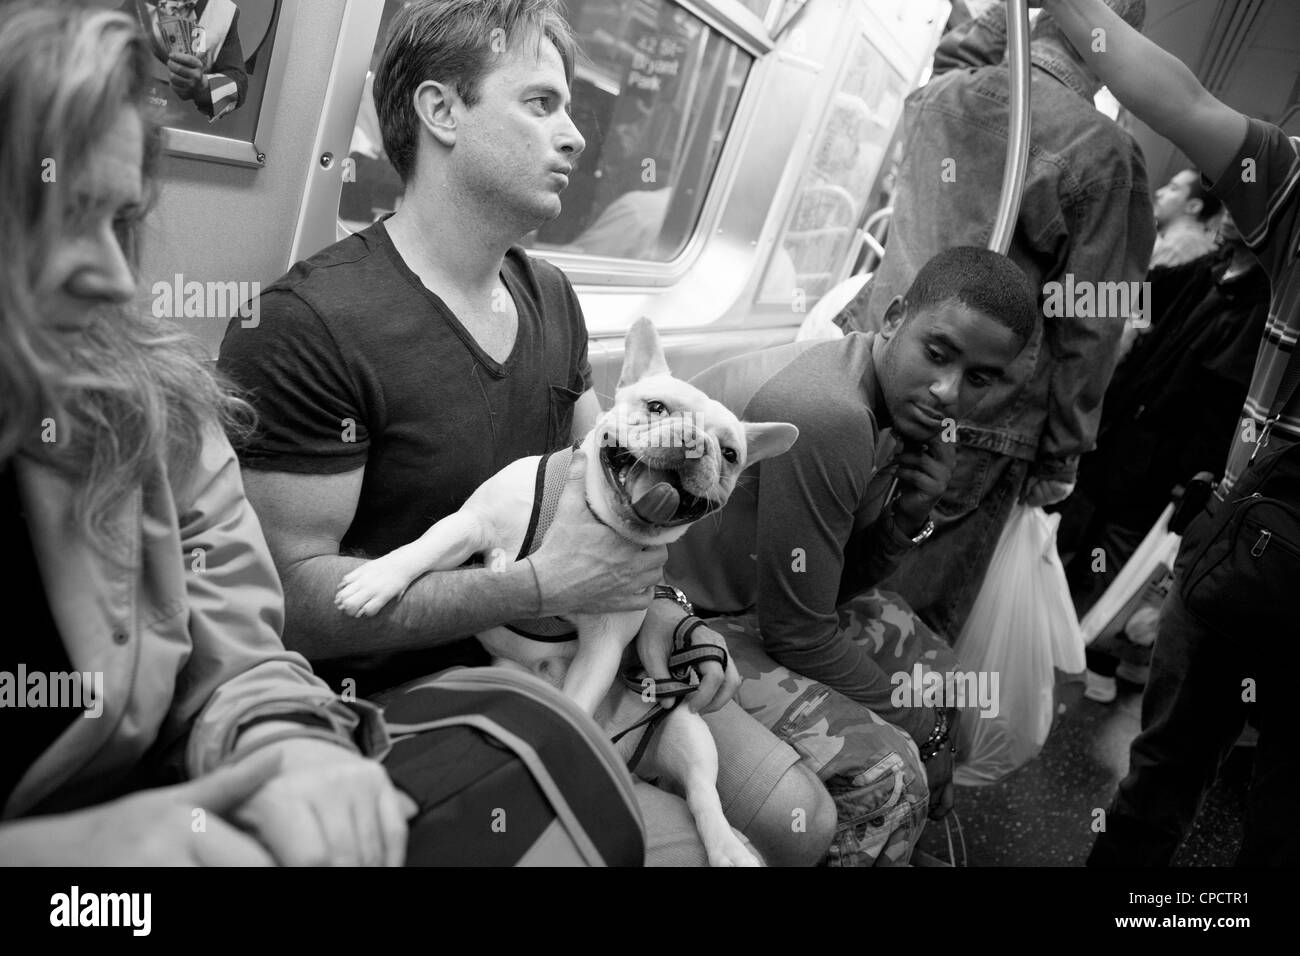 A dog smiles while sitting on its owner's lap on the subway in New York City. Stock Photo